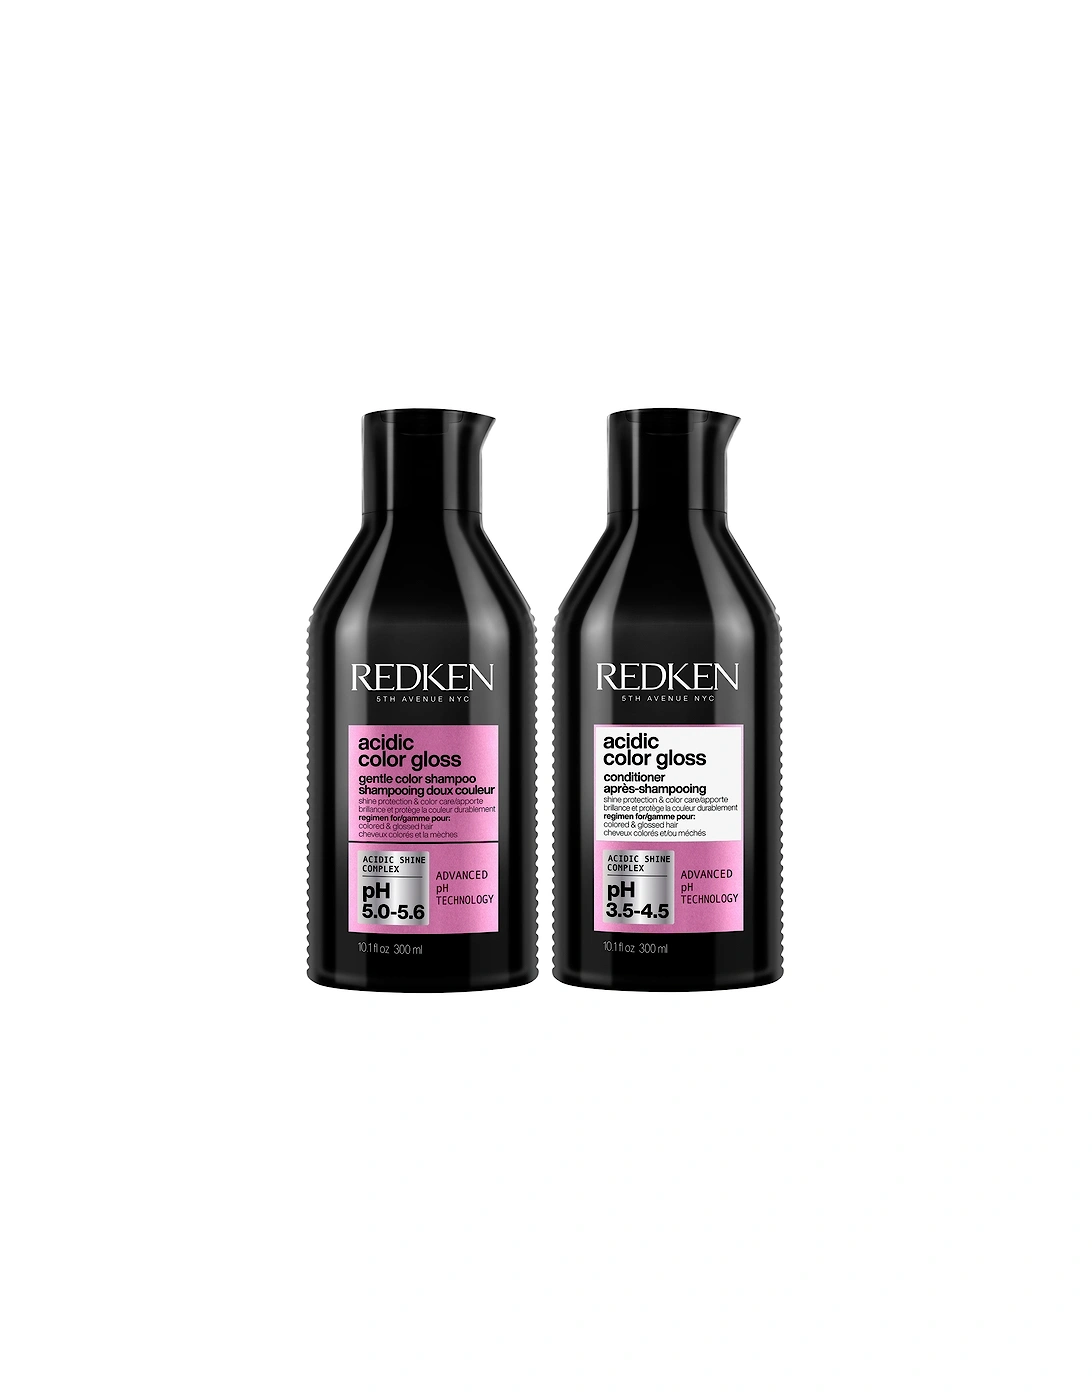 Acidic Color Gloss Shampoo and Conditioner 300ml, Colour Protection Routine for Glass-Like Shine, 2 of 1